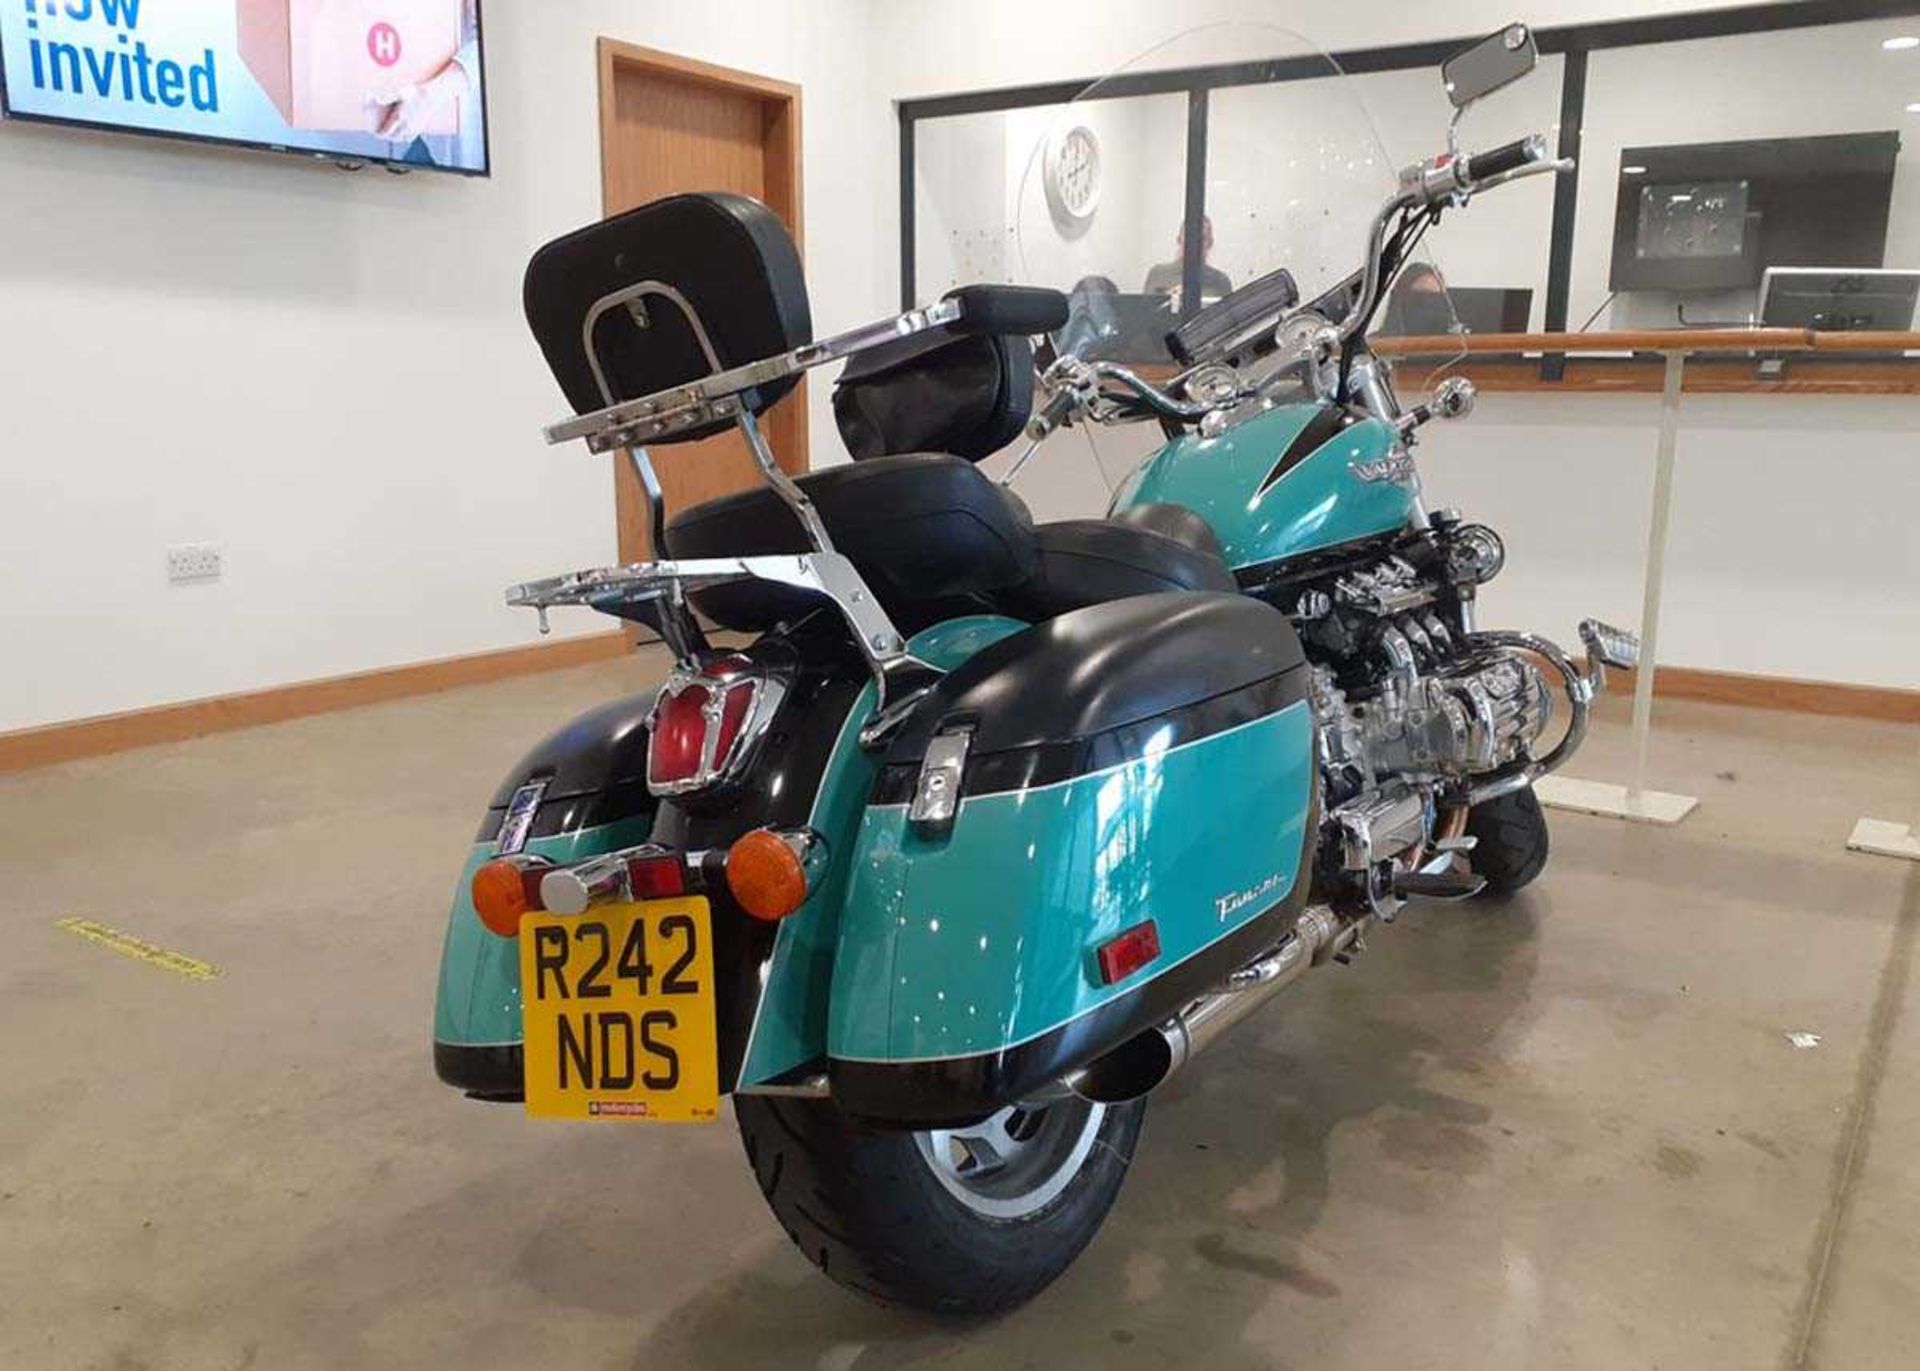 (1998) Honda Valkyrie F6 Tourer Motorbike in turquoise and black, first registered in UK 01/08/21, - Image 4 of 11